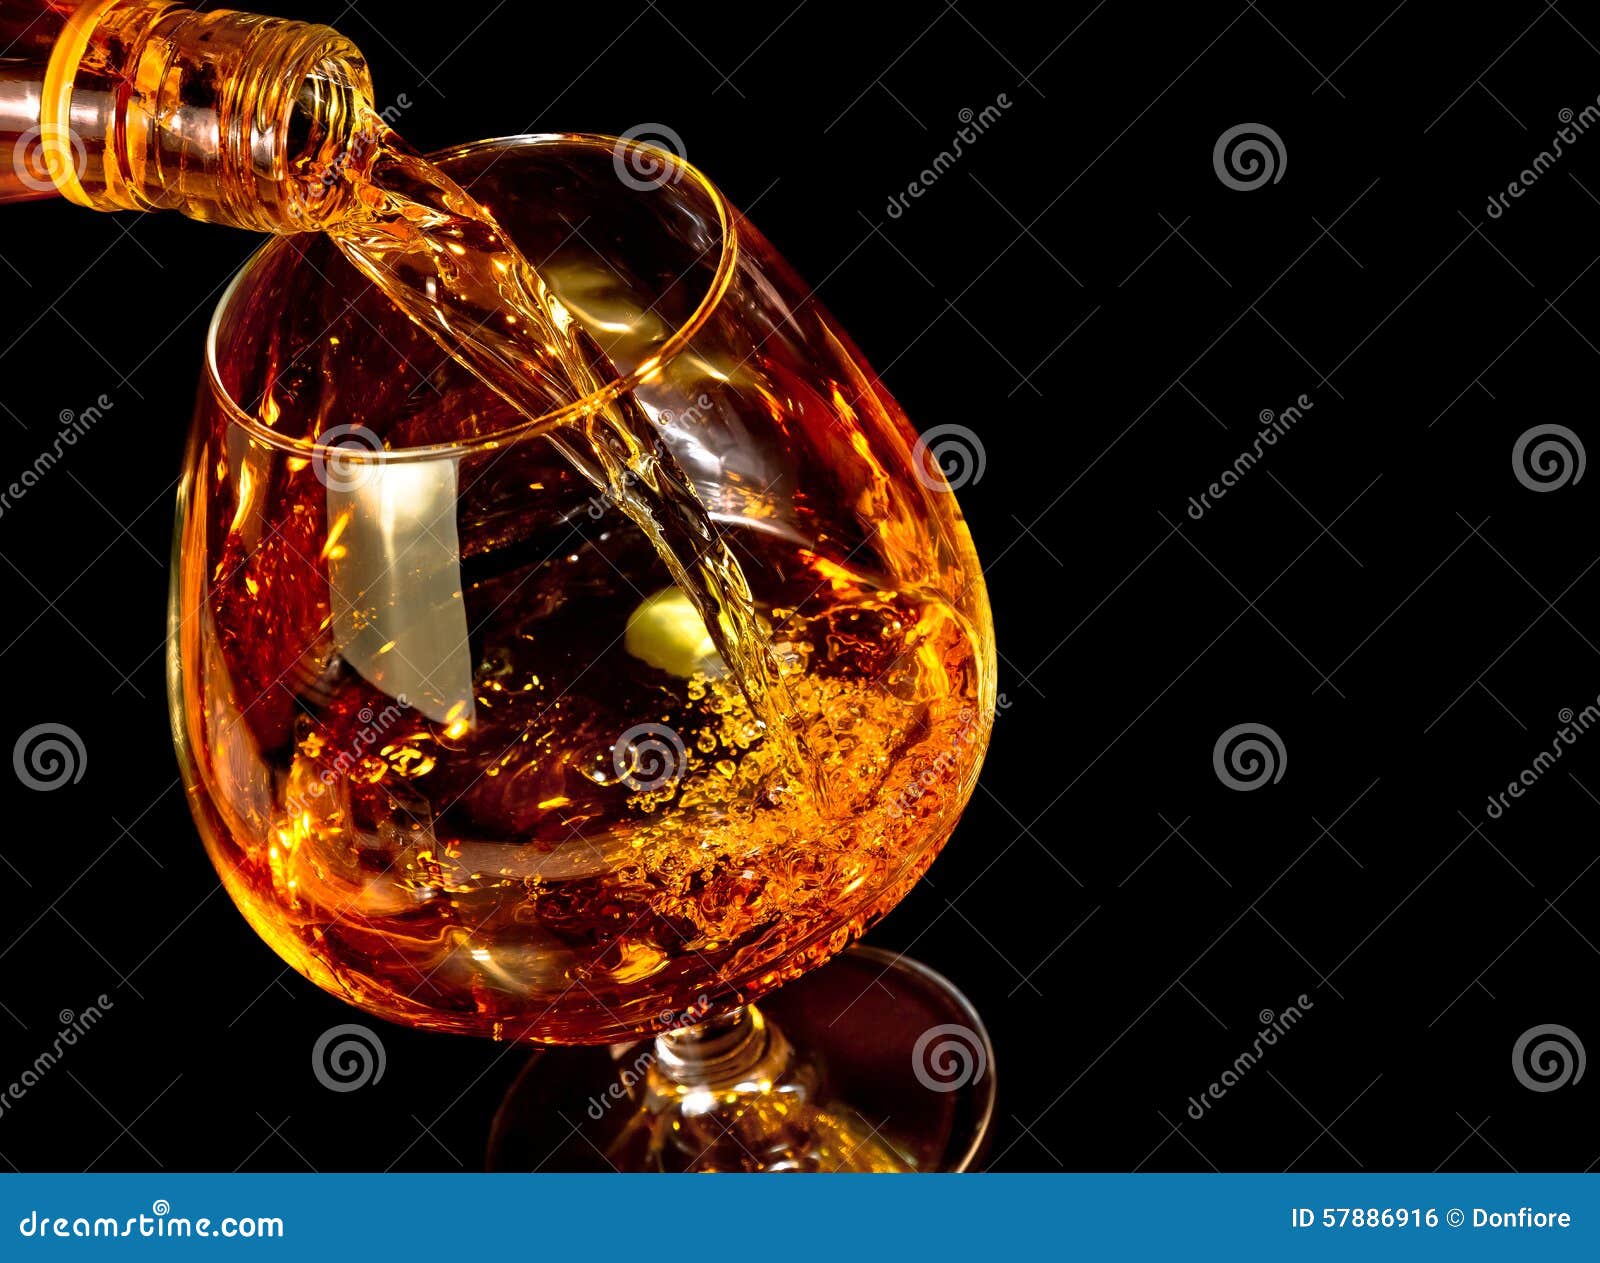 barman pouring snifter of brandy in elegant typical cognac glass on black background